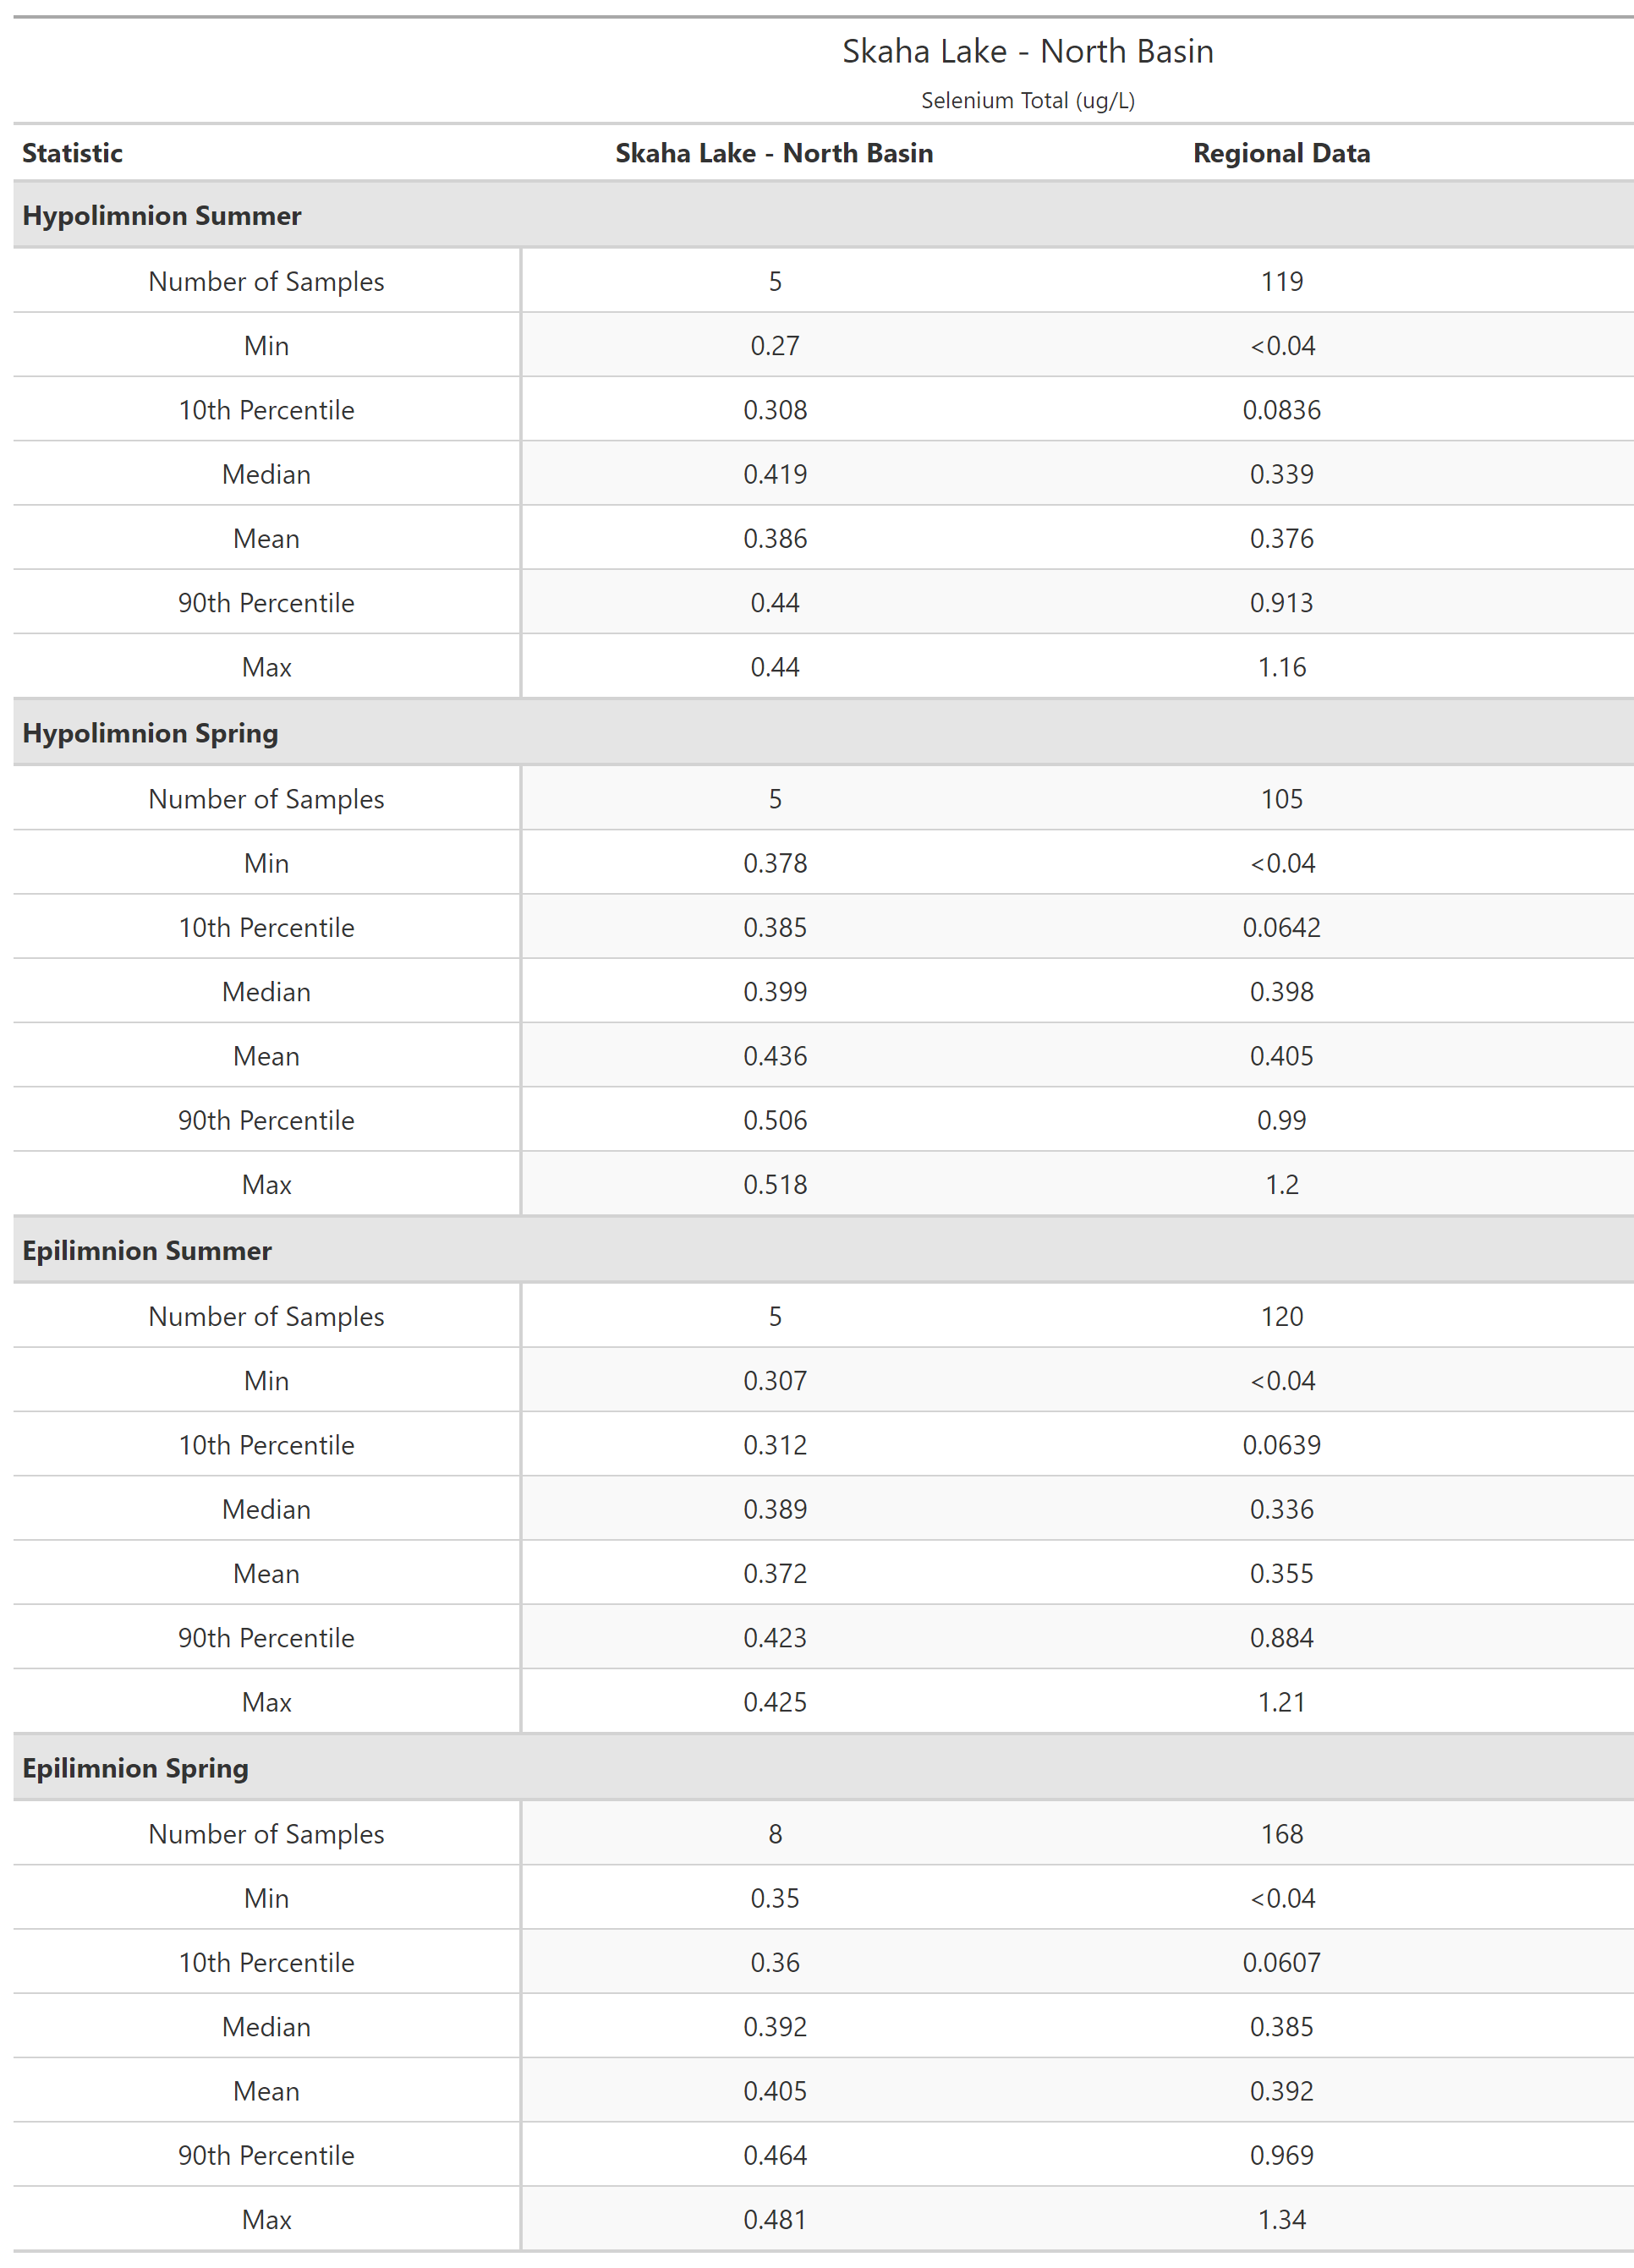 A table of summary statistics for Selenium Total with comparison to regional data